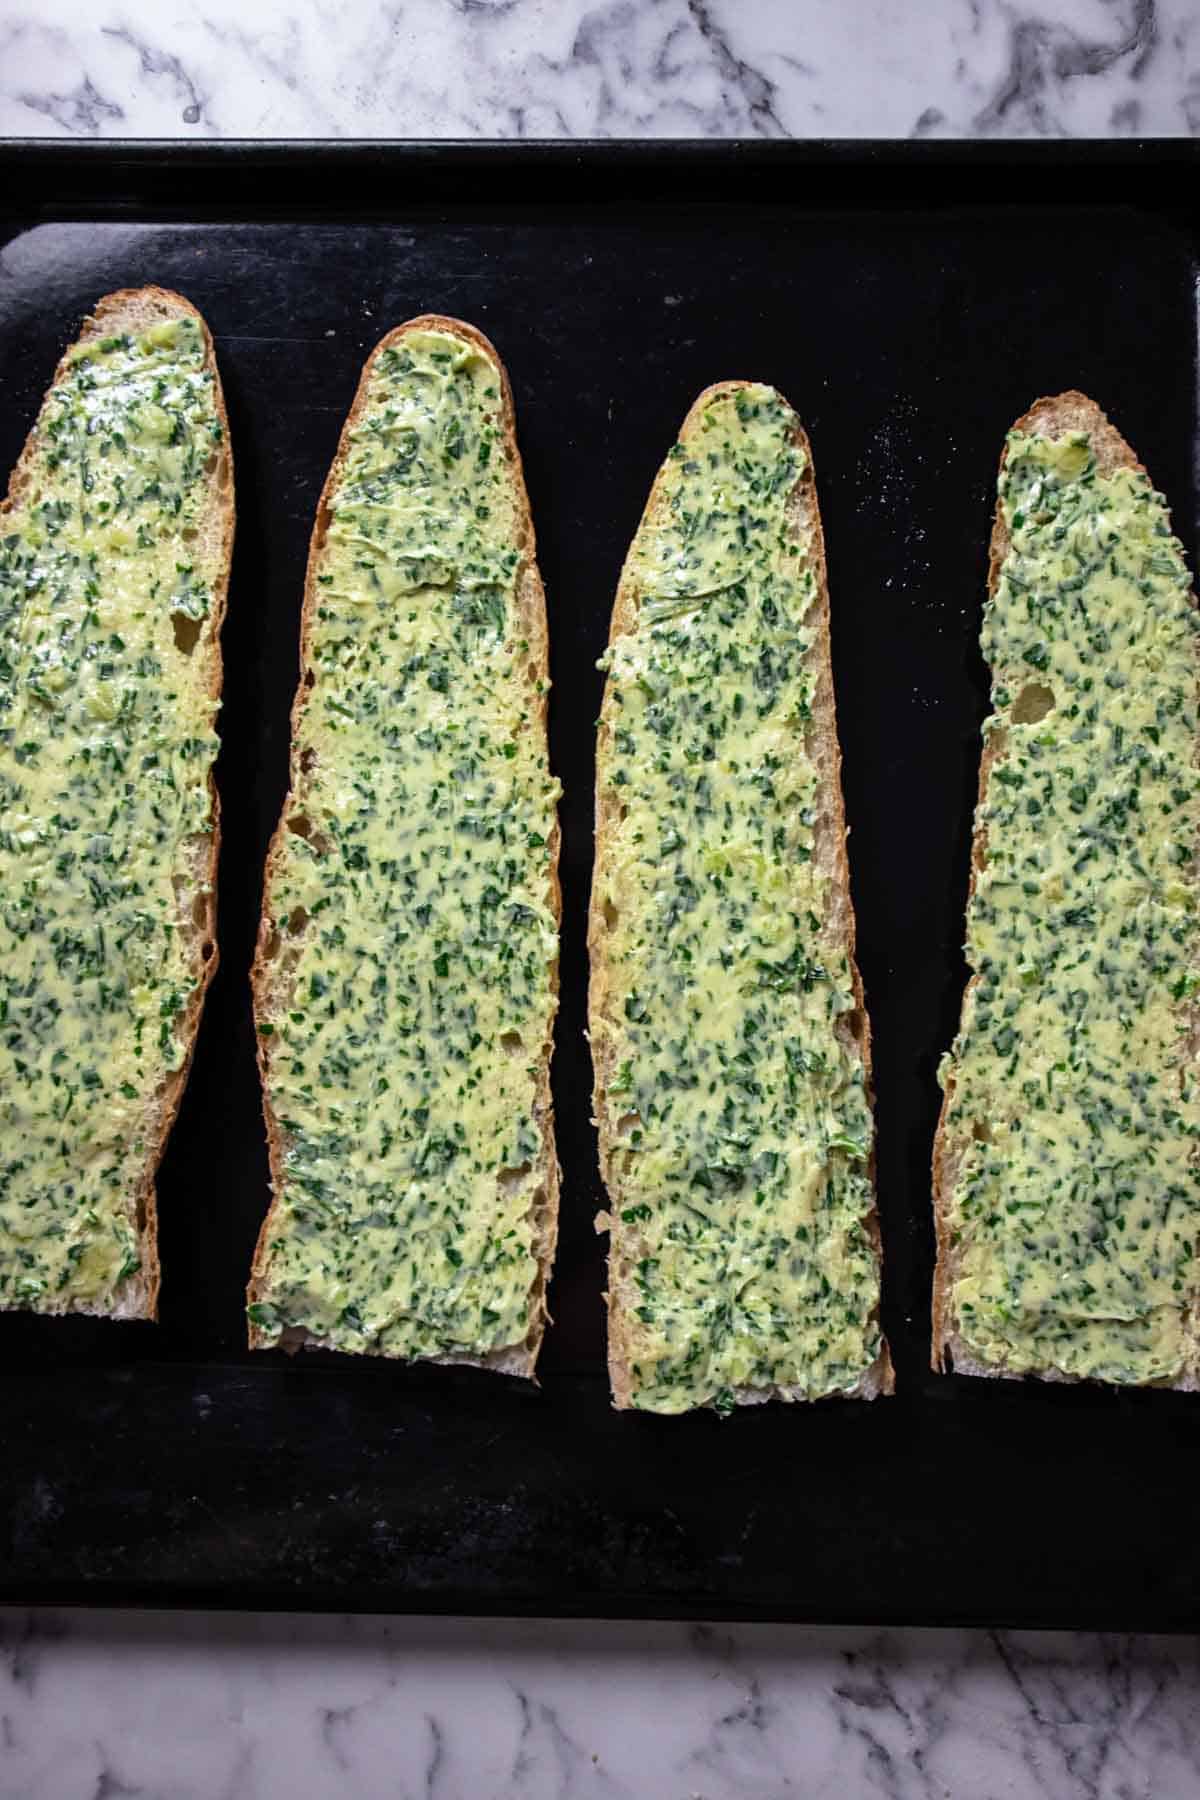 Gluten free baguette slices with a layer of garlic butter